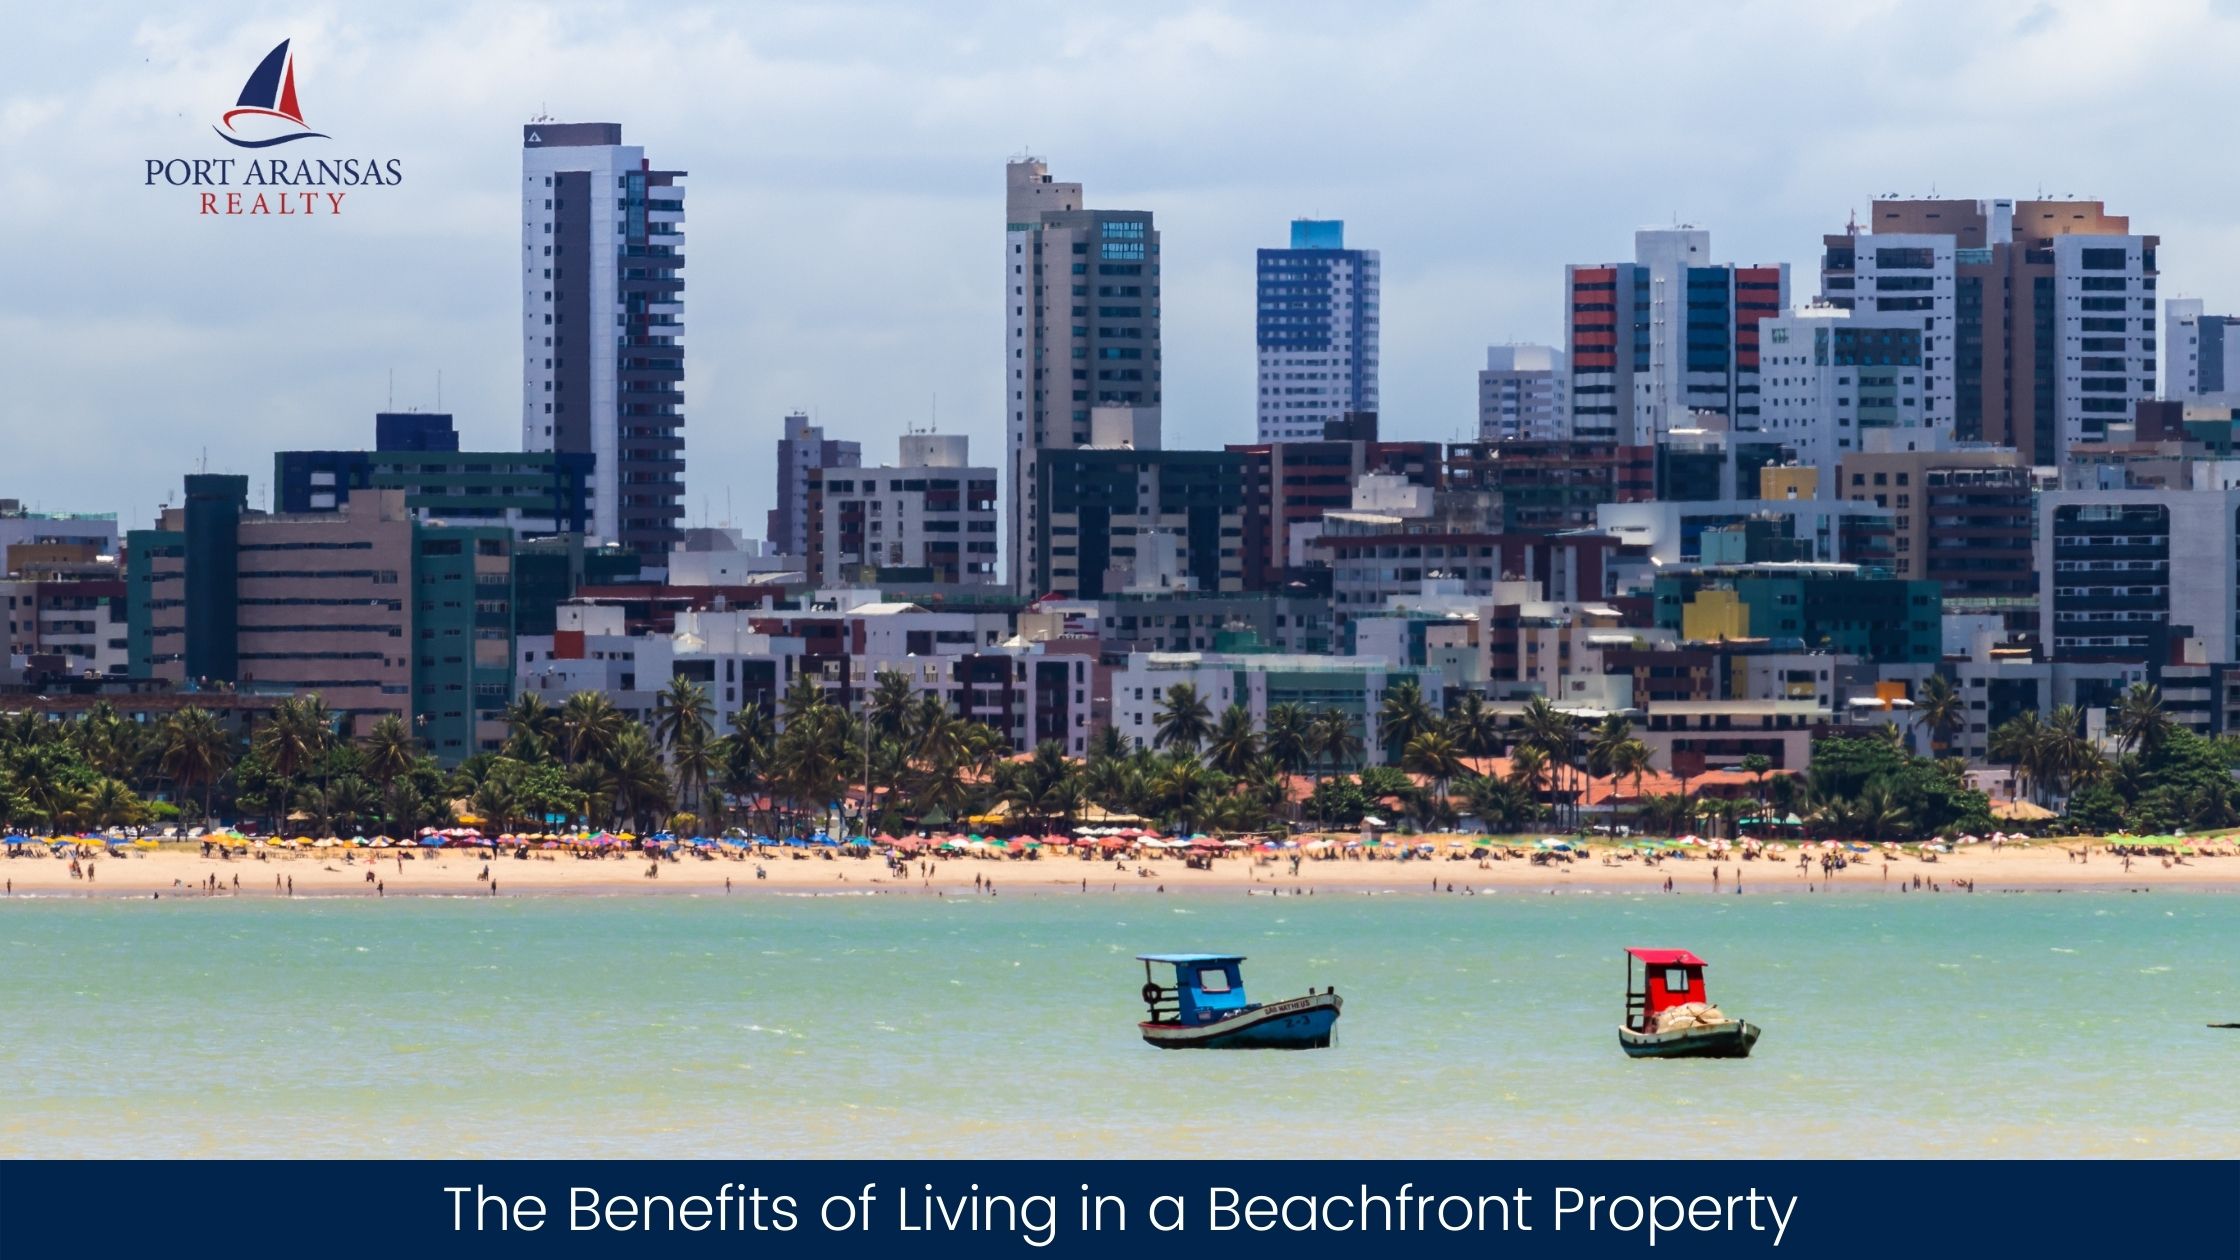 The Benefits of Living in a Beachfront Property